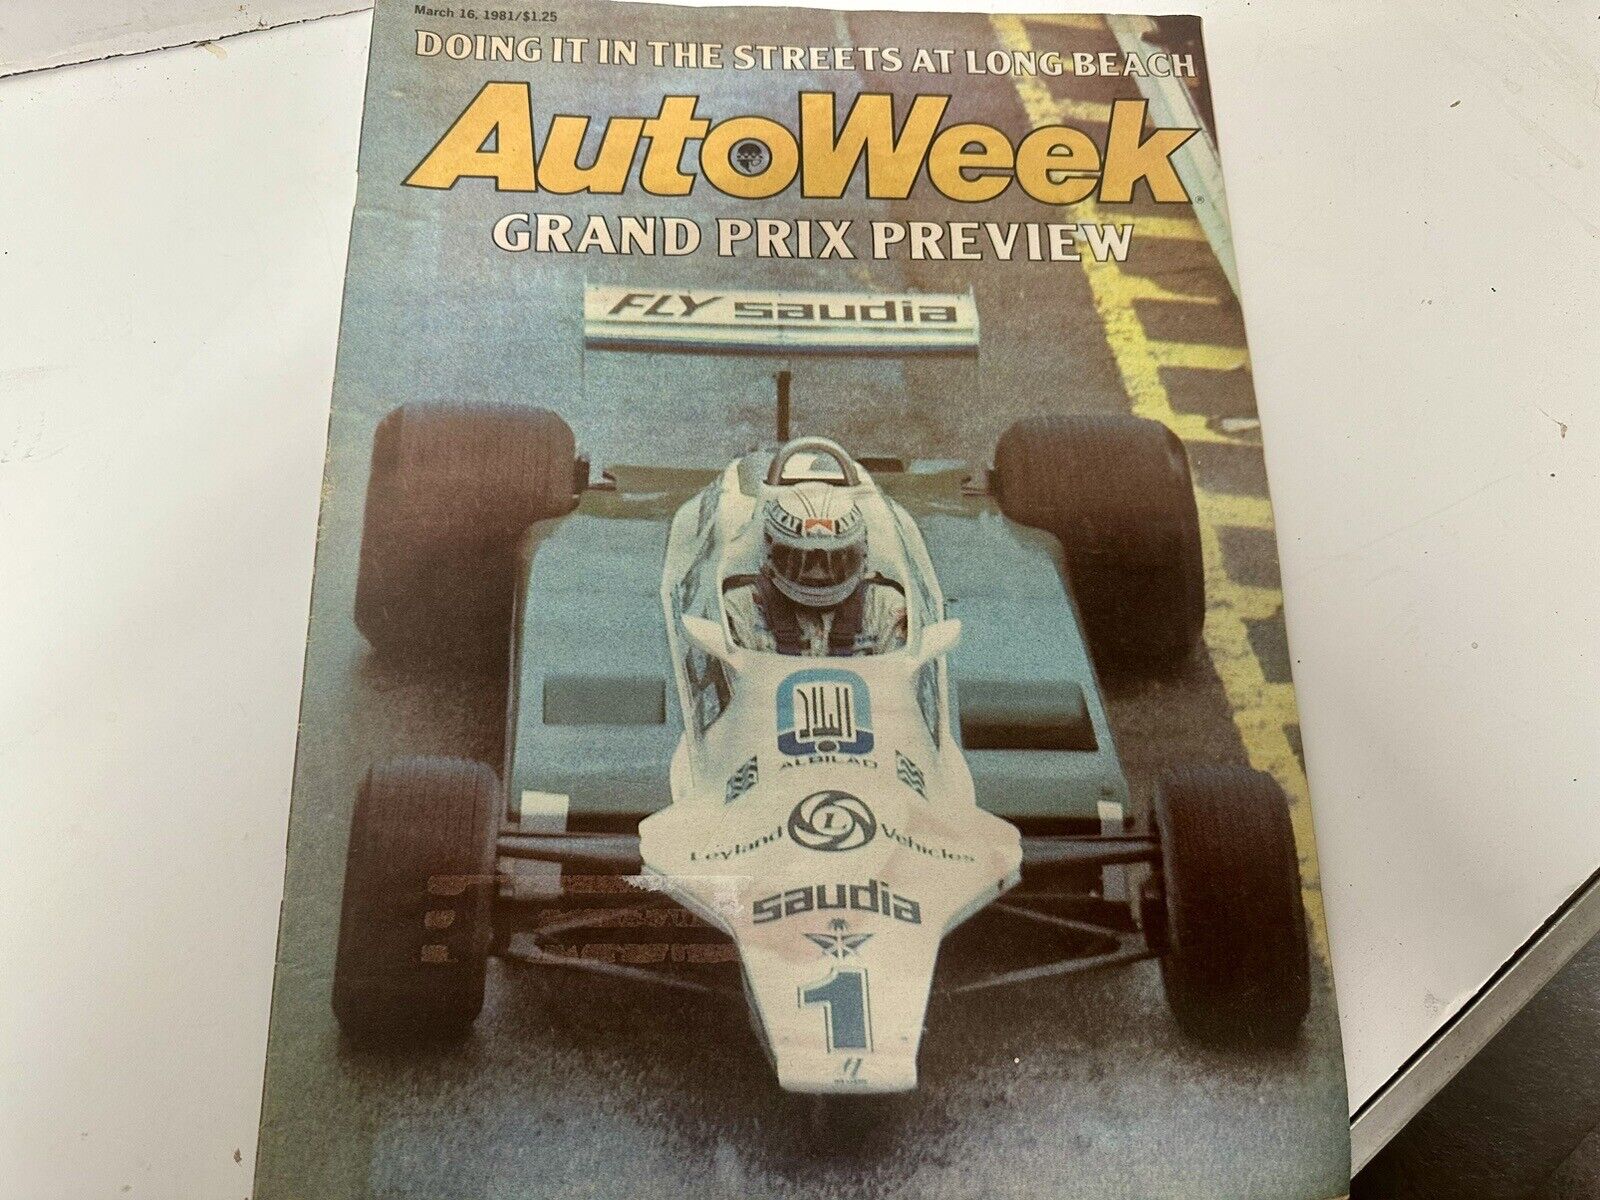 AUTOWEEK MARCH, 1981 GRAND PRIX PREVIEW At LONG BEACH and COMPETITION PRESS